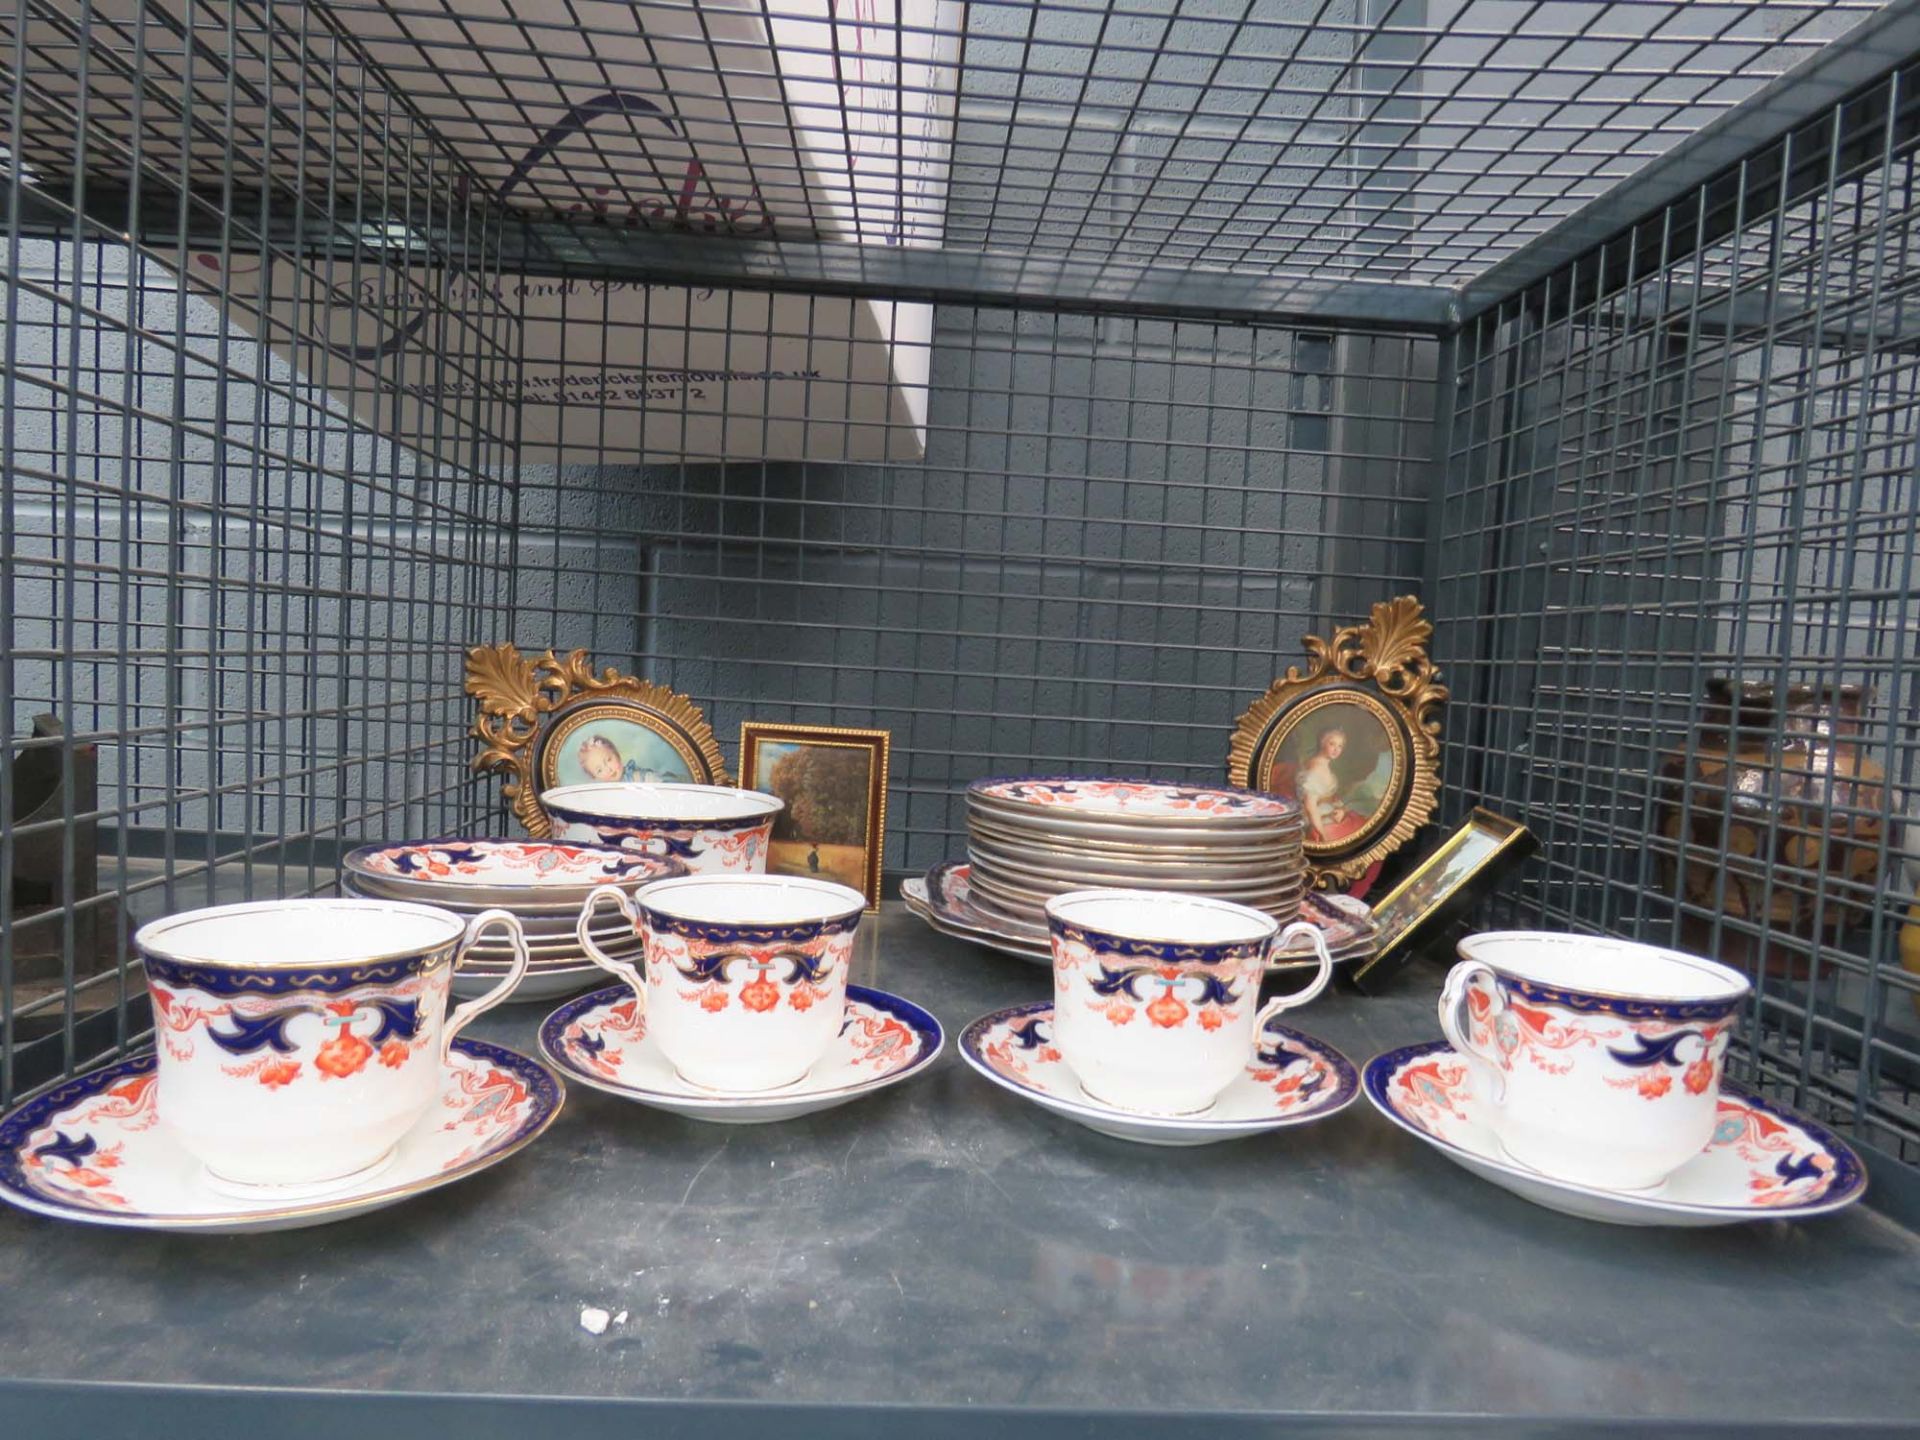 Cage containing floral patterned cups and saucers plus side plates and miniature portraits